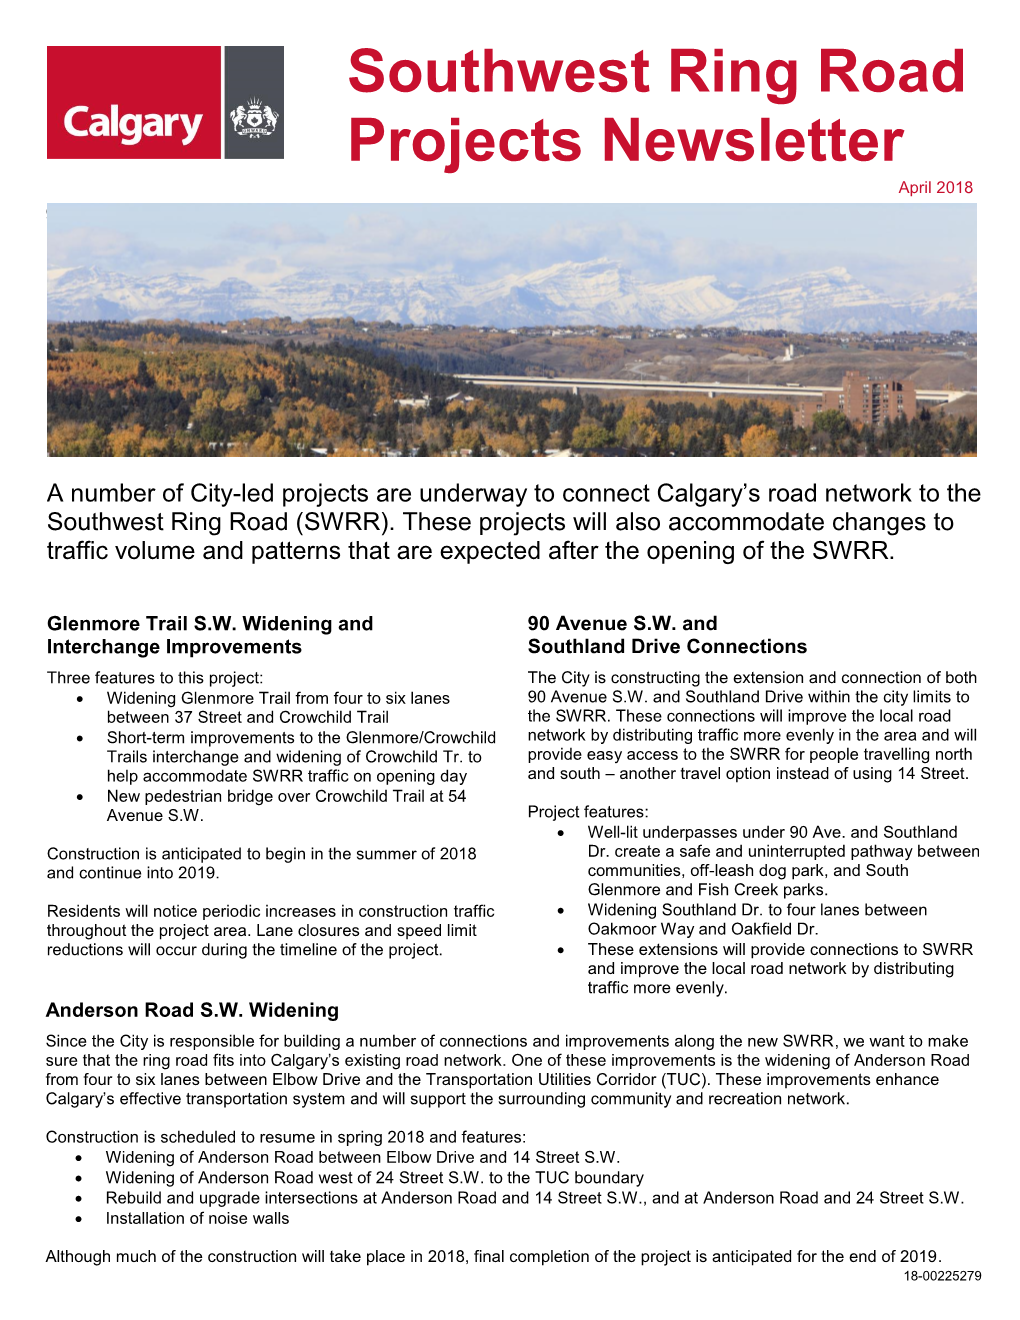 Southwest Ring Road Projects Newsletter April 2018 90 Avenue S.W